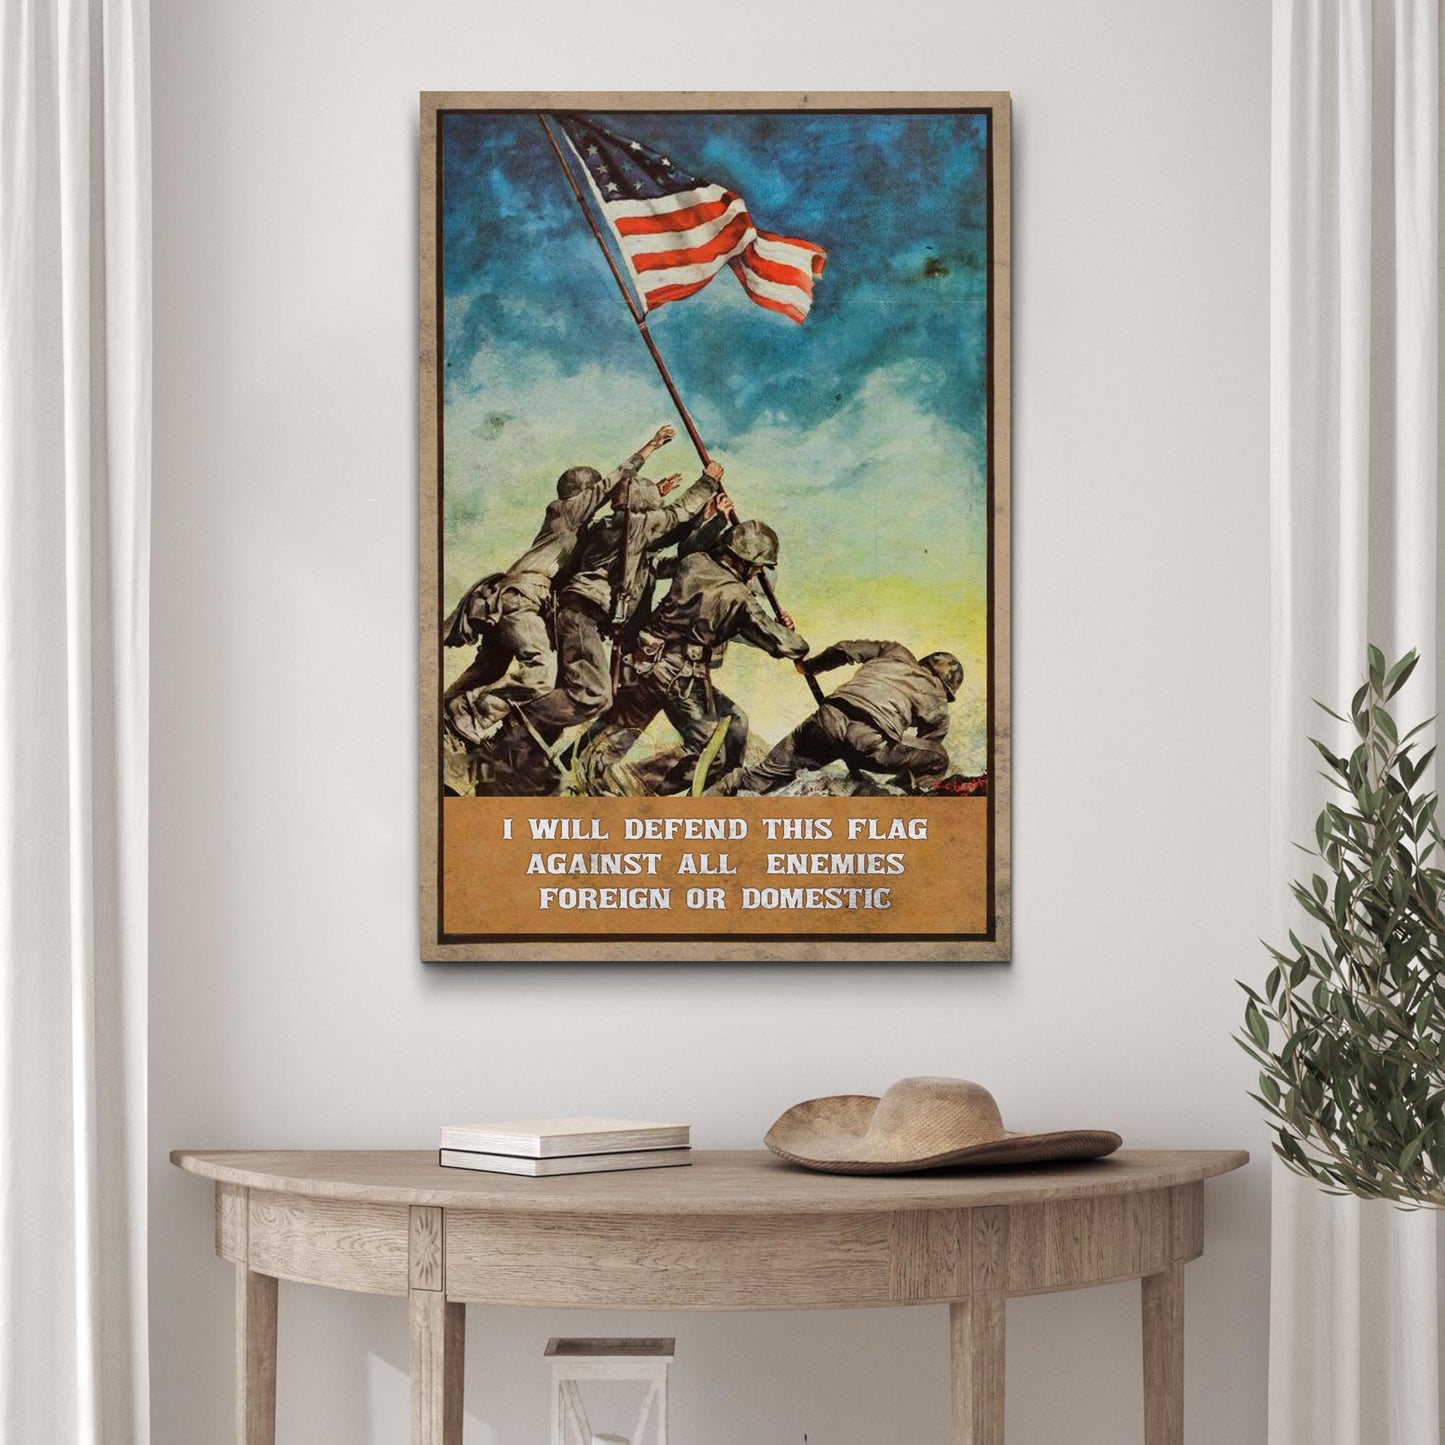 Defend This Flag Sign II - Image by Tailored Canvases